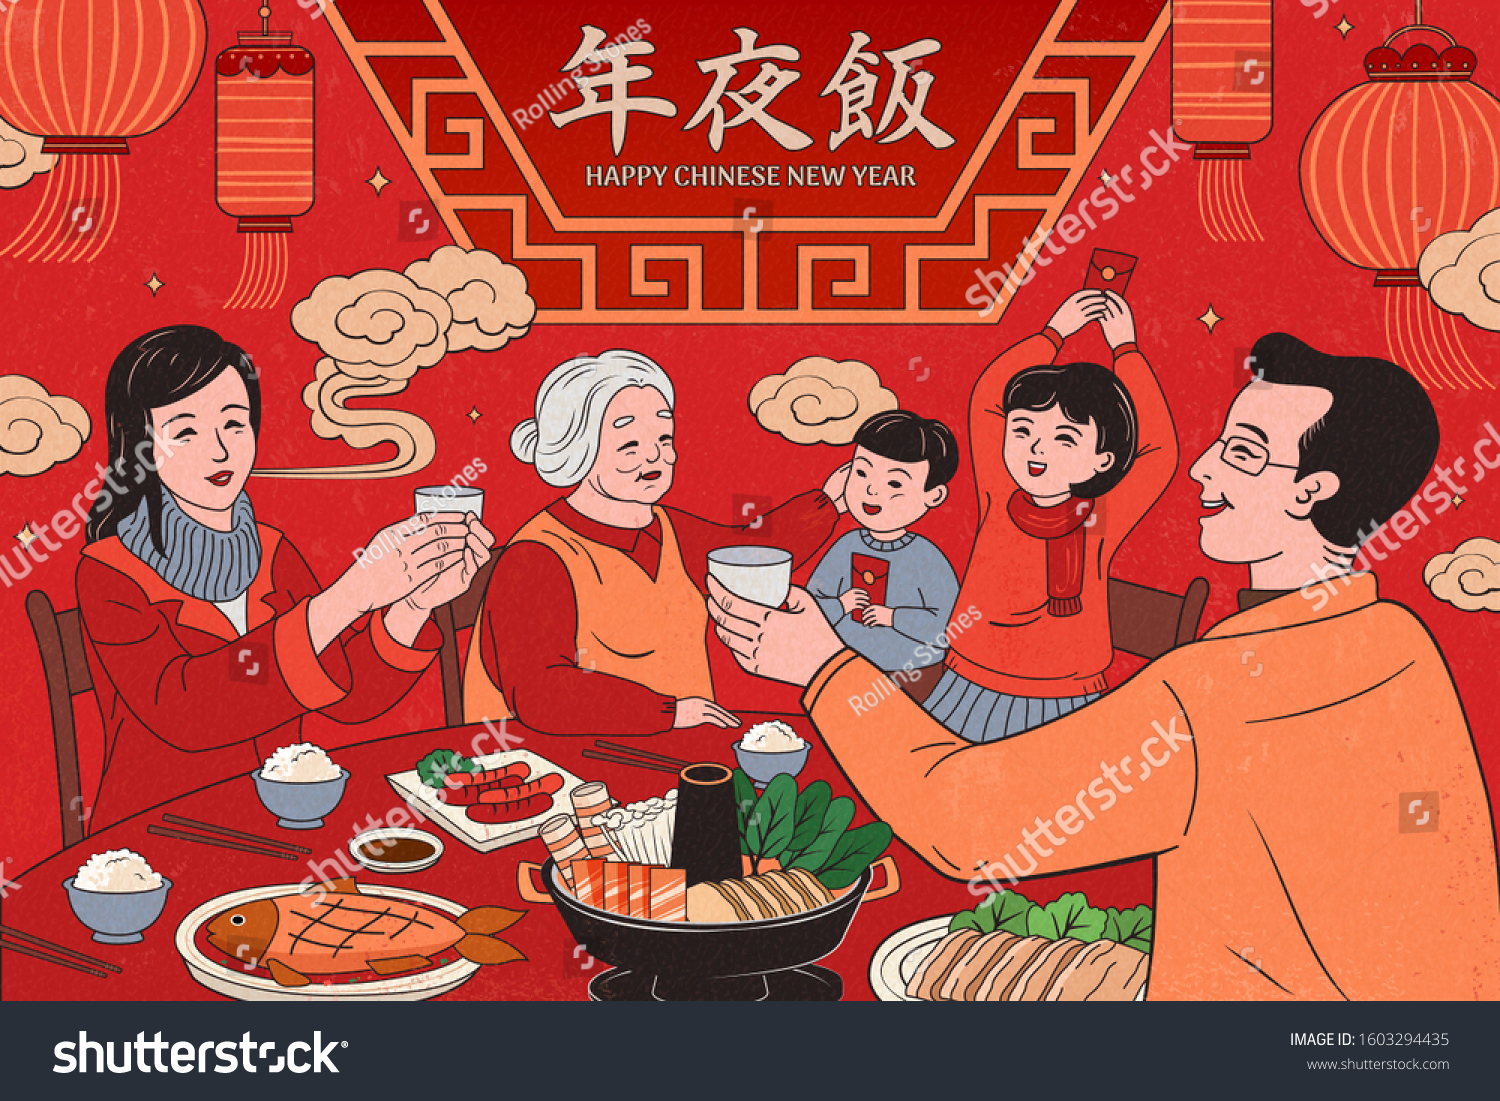 SVG of Family enjoying new year's dinner illustration in red tone, Reunion dinner written in Chinese text svg